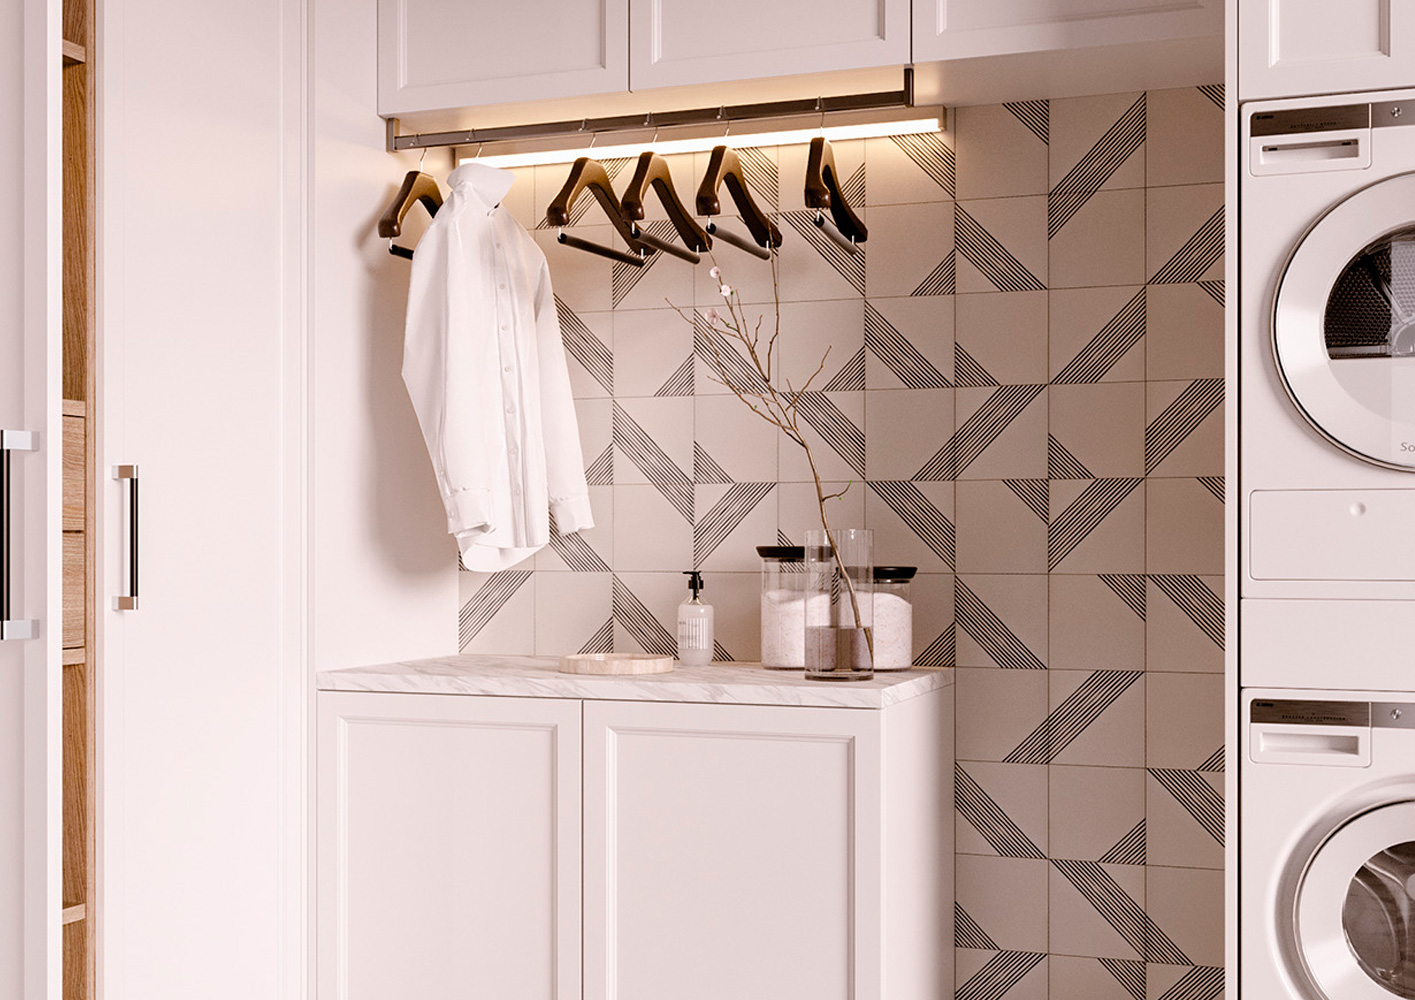 Ceramic Wall Art: Wallpaper with Tiles